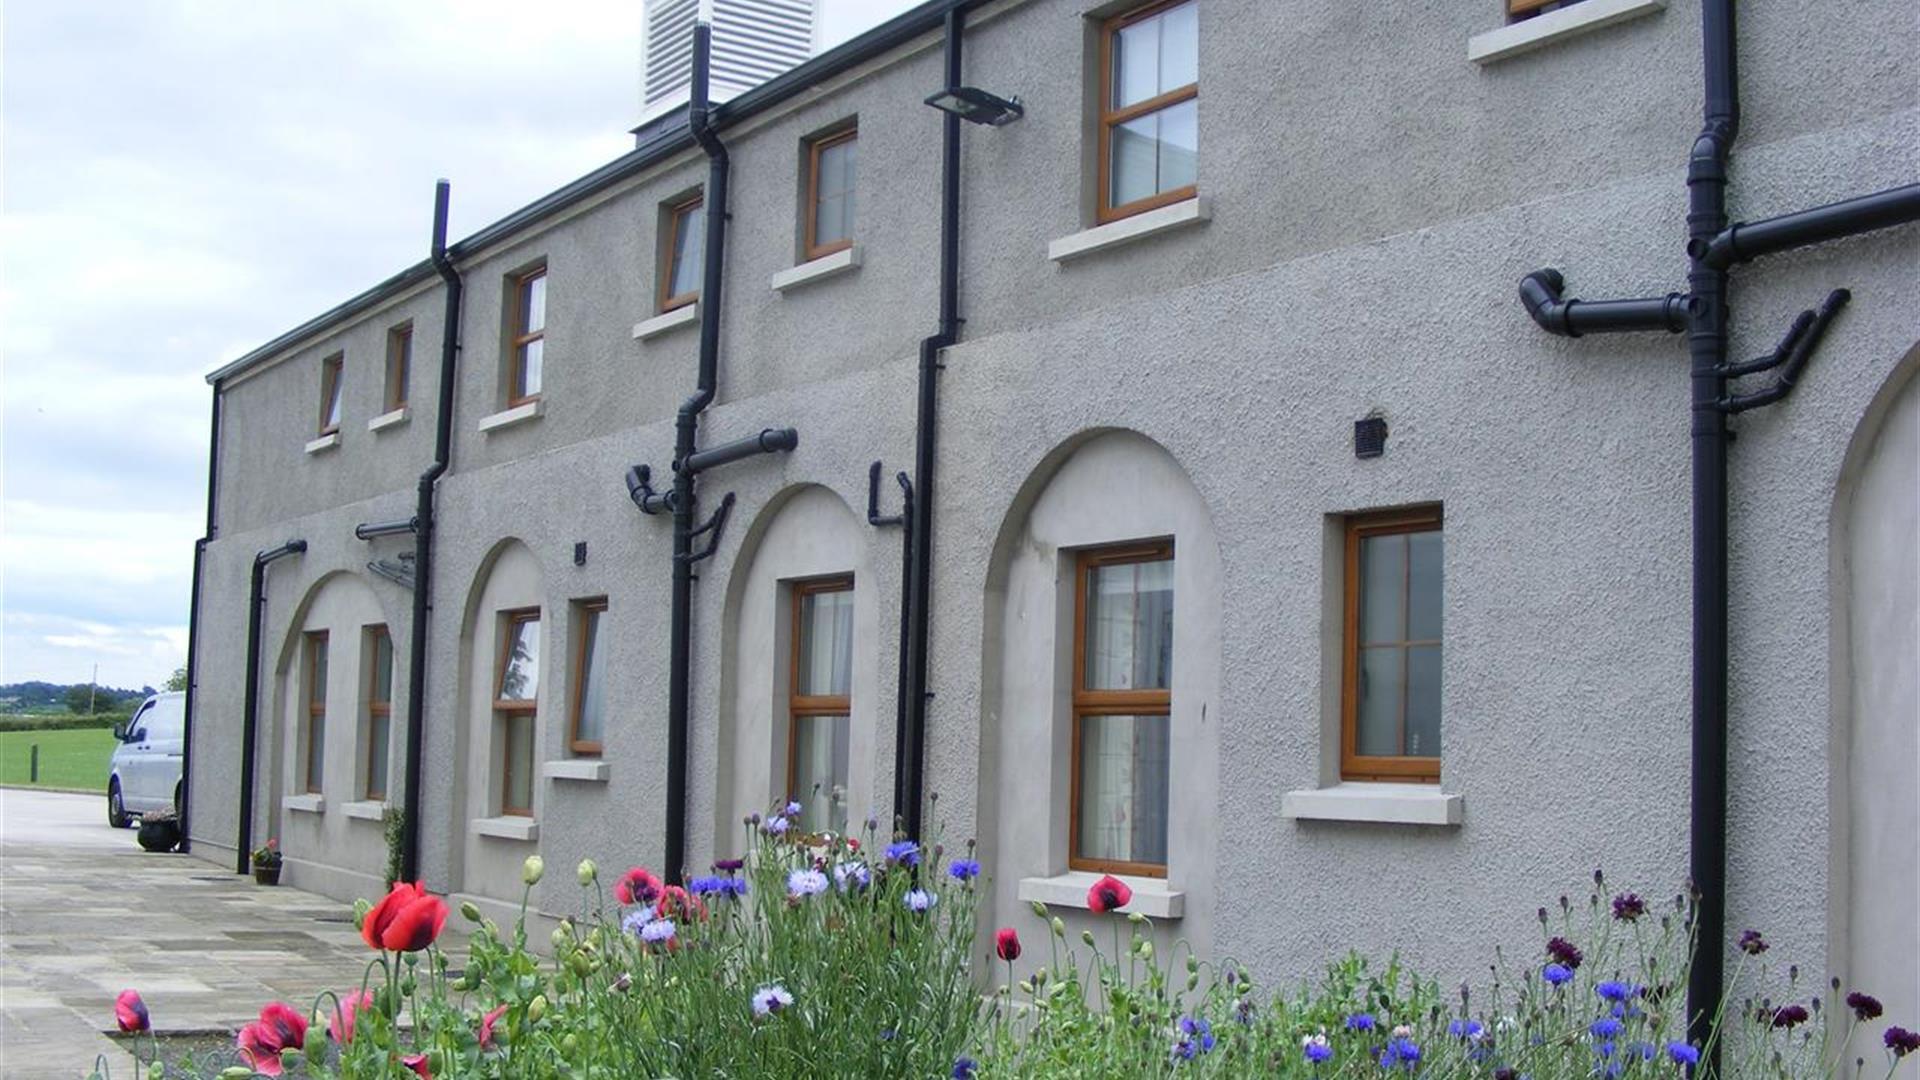 Image is of front of property with flower beds